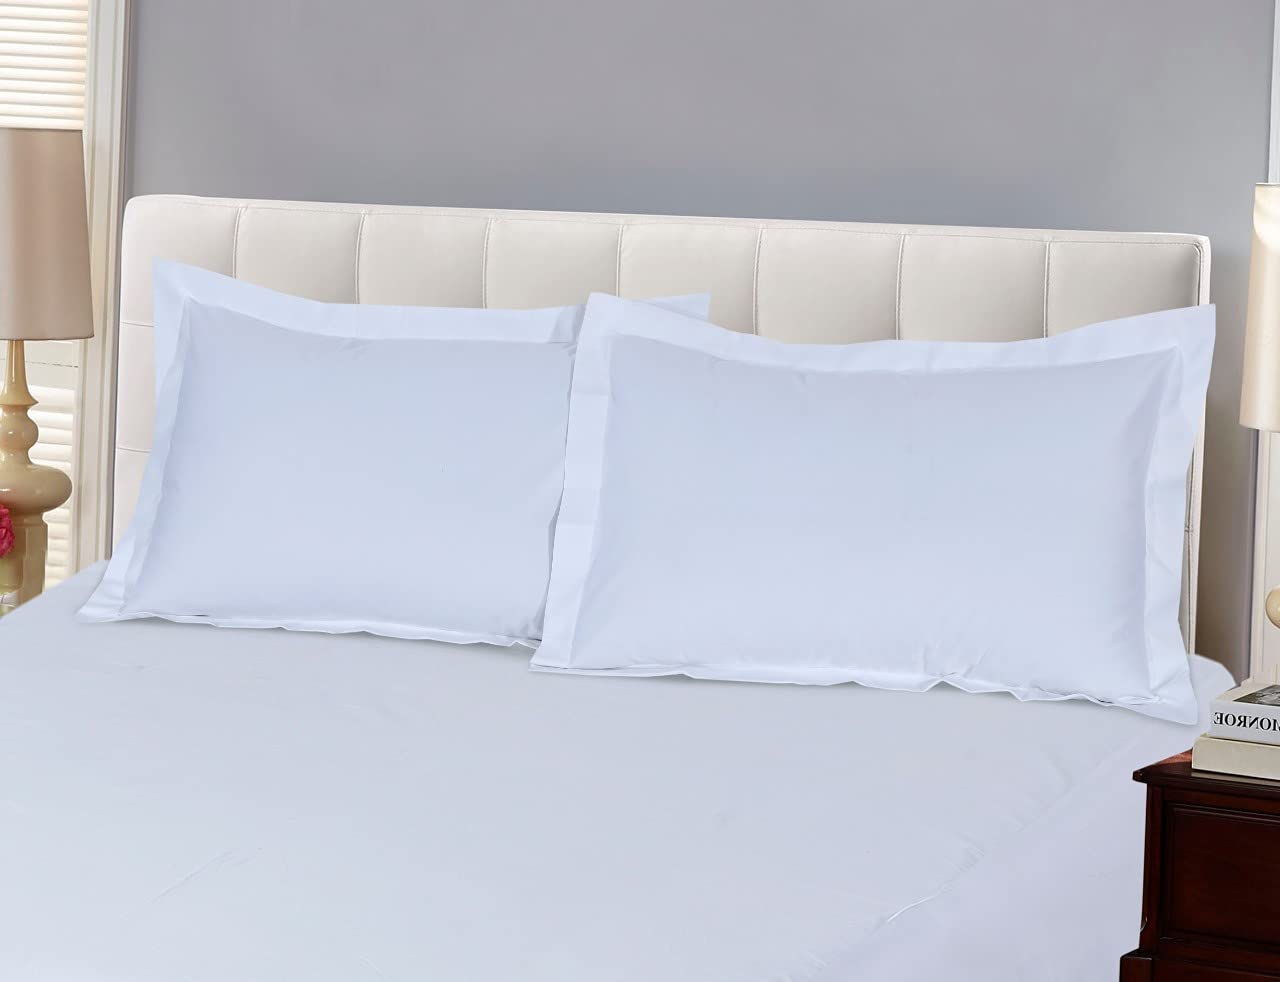 Linen Zone - 800 Thread - 100% Pure Egyptian Cotton - Super Soft - 7 Star Hotel Quality - Oxford Pillow Cases (White, 2 Oxford Pillow Cases)